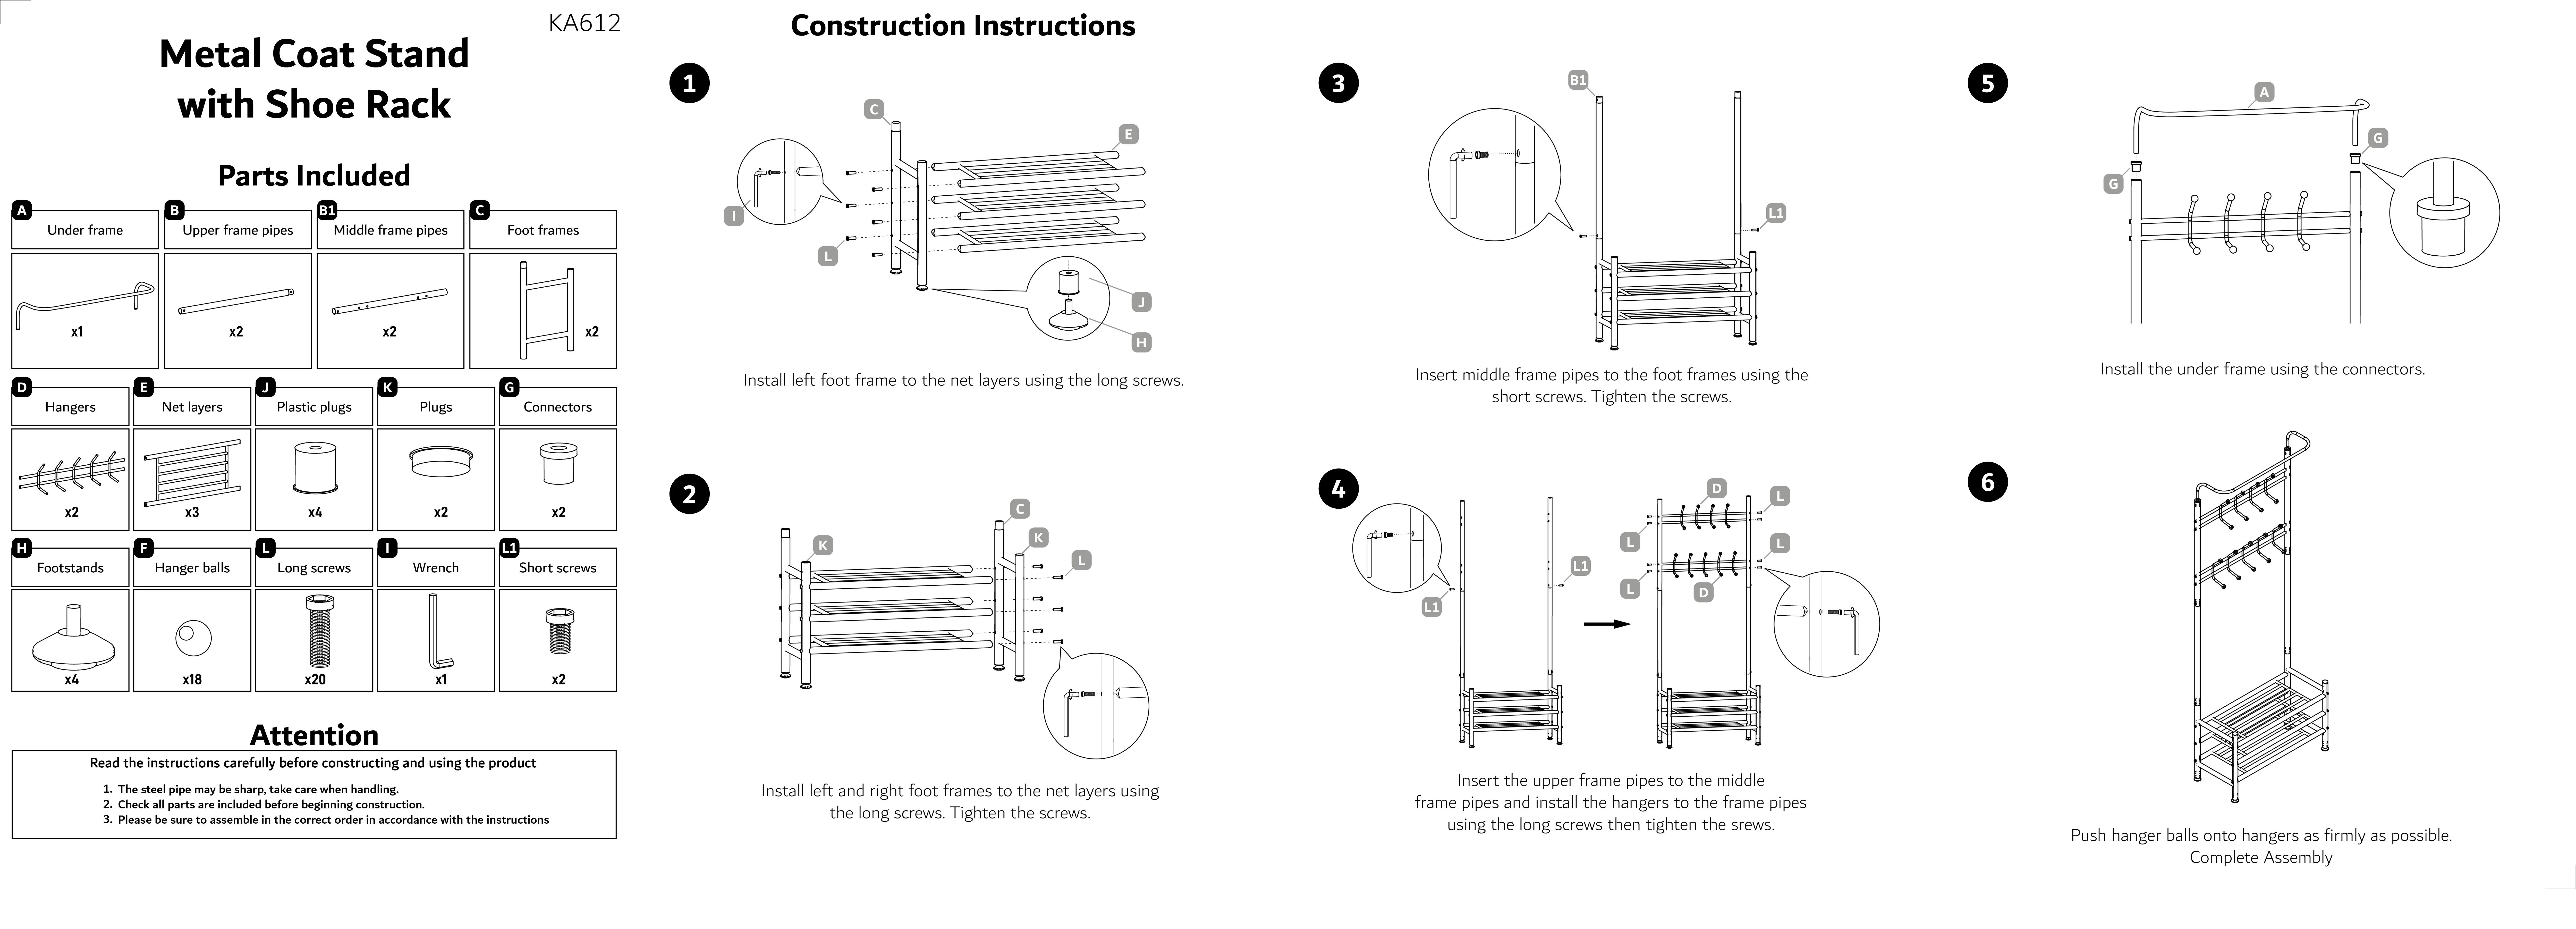 Assembly and installation instructions